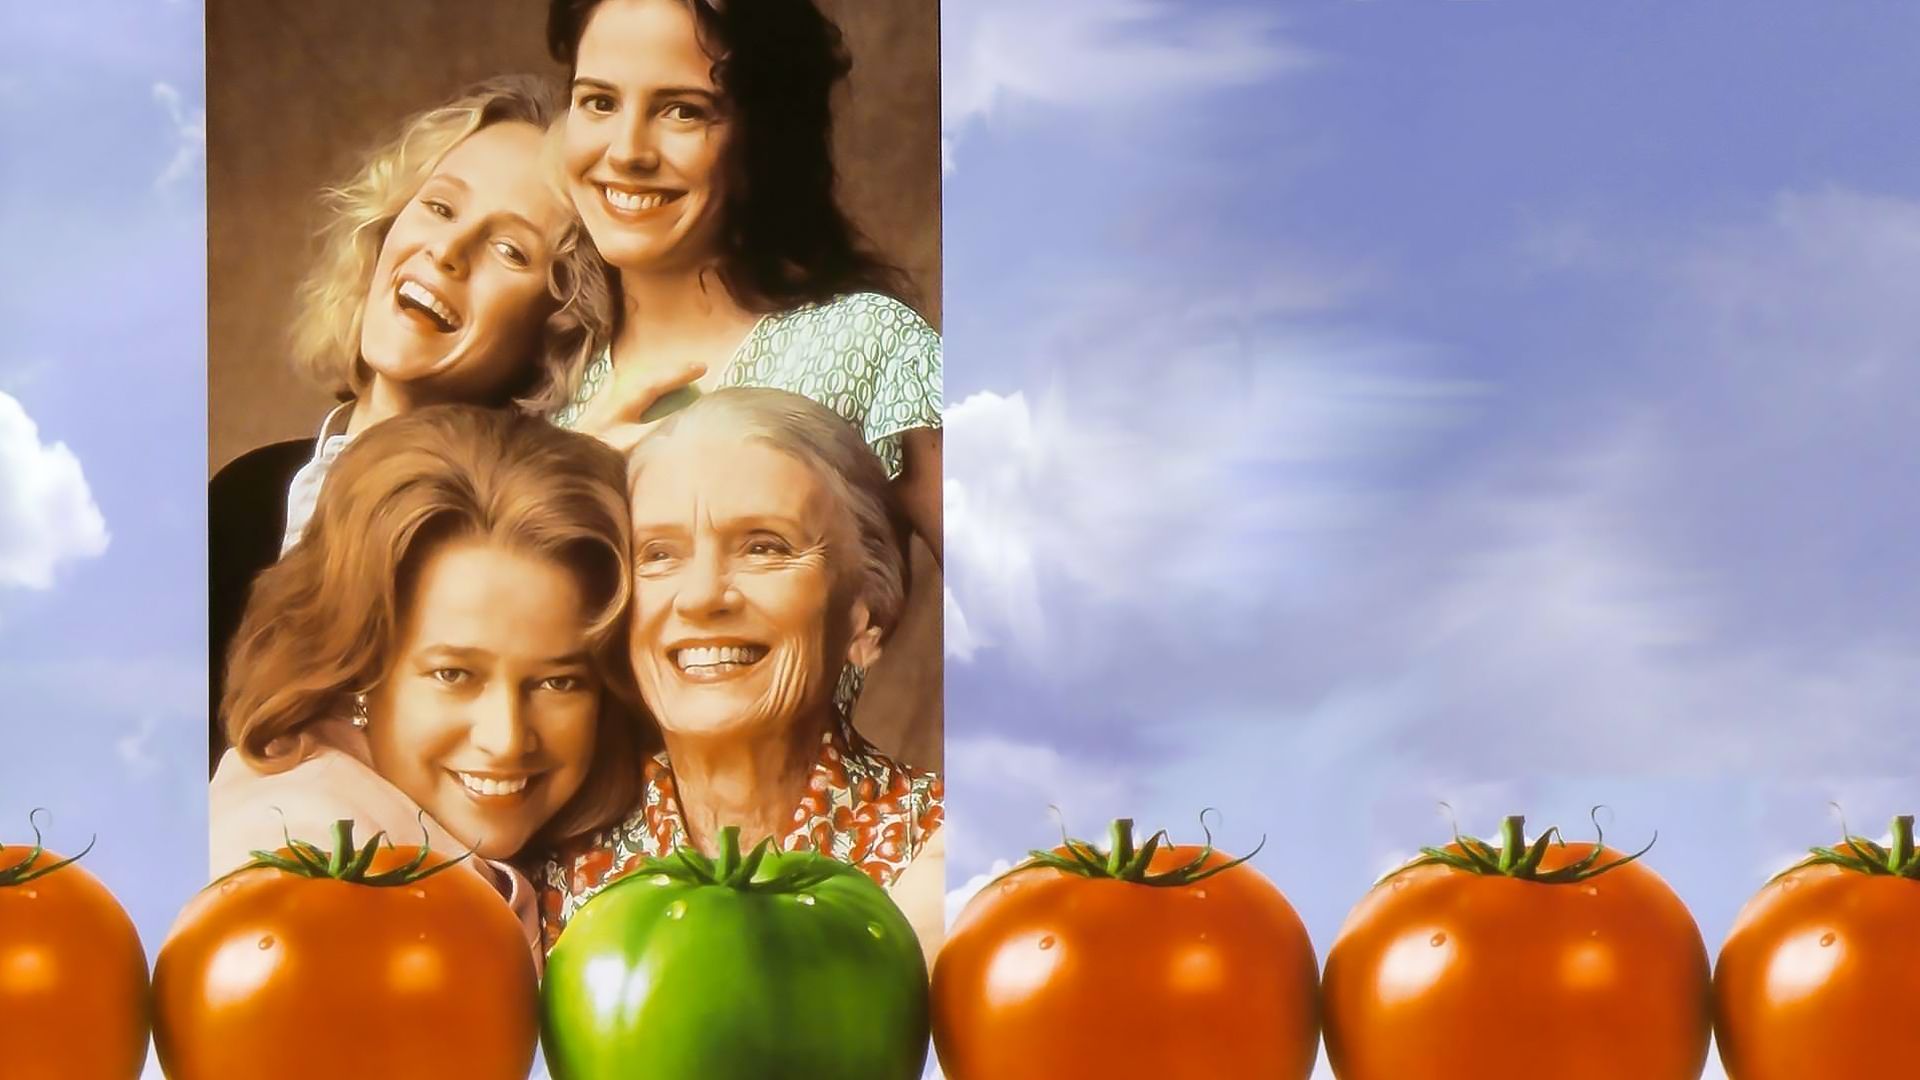 Fried Green Tomatoes background